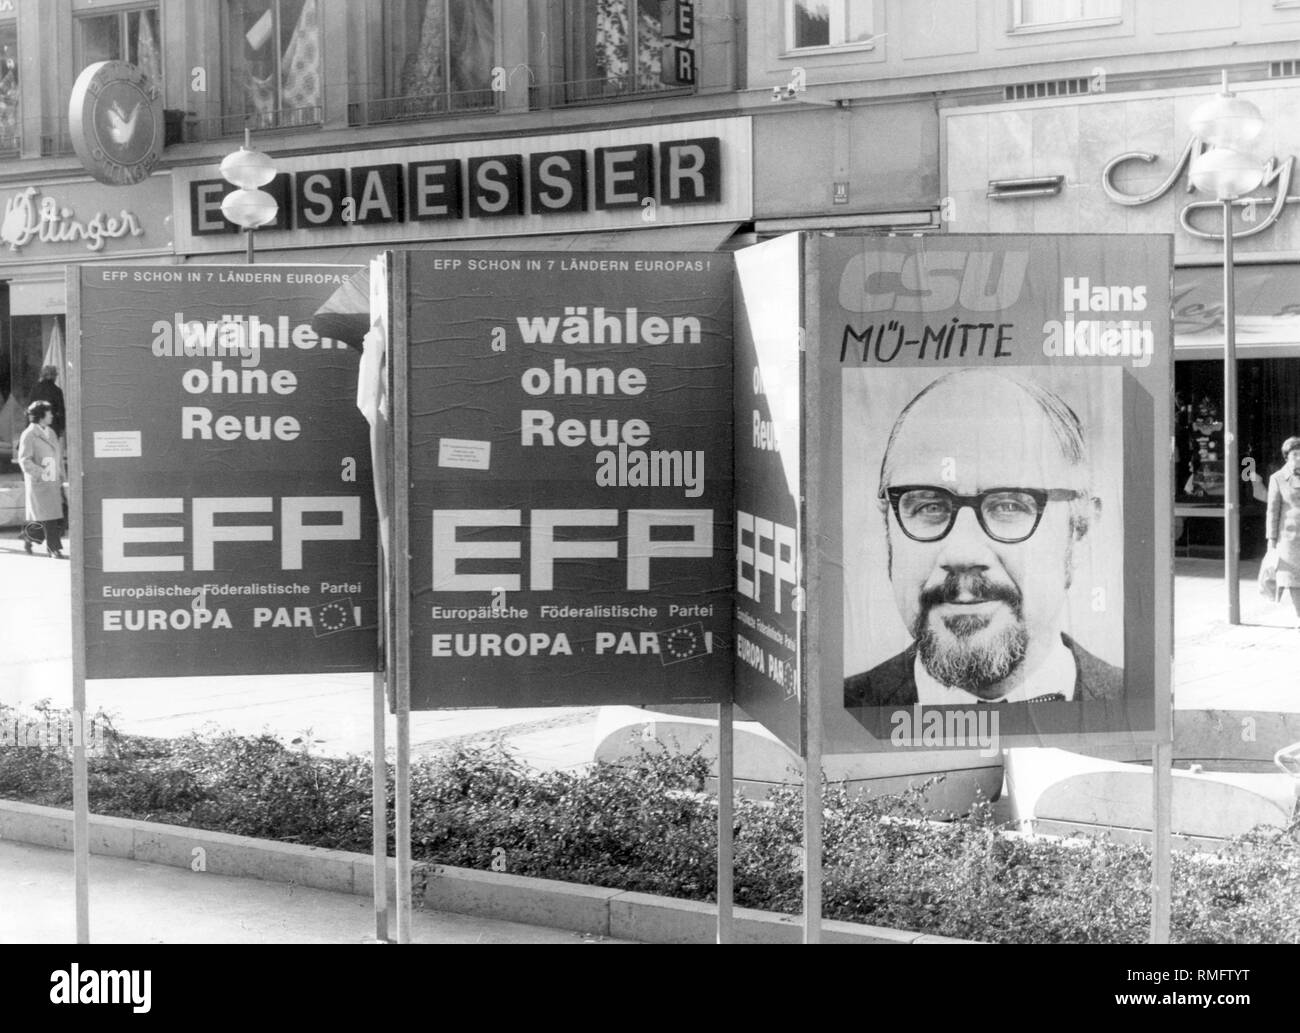 Election posters of the EFP and the CSU in a shopping street in Munich. The European Federalist Party (EFP) campaigns with 'Vote without remorse' and the CSU with the deputy for Mue-Mitte, Hans Klein. Stock Photo